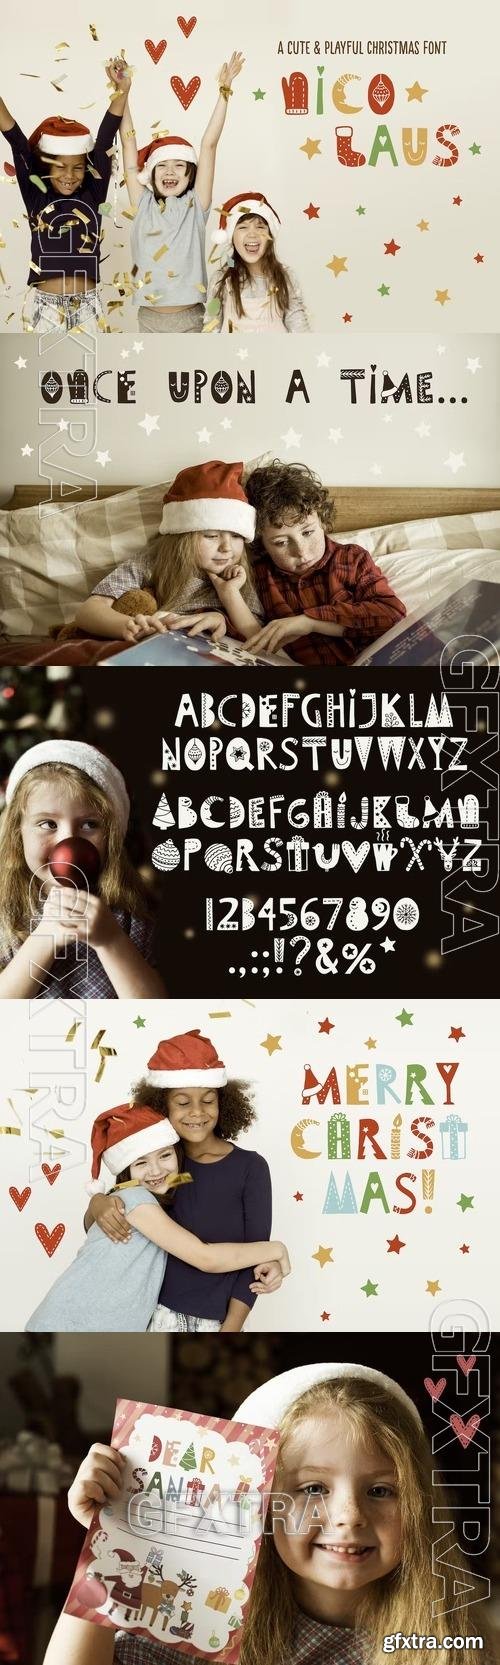 Nico Laus - A Cute And Playful Christmas Font